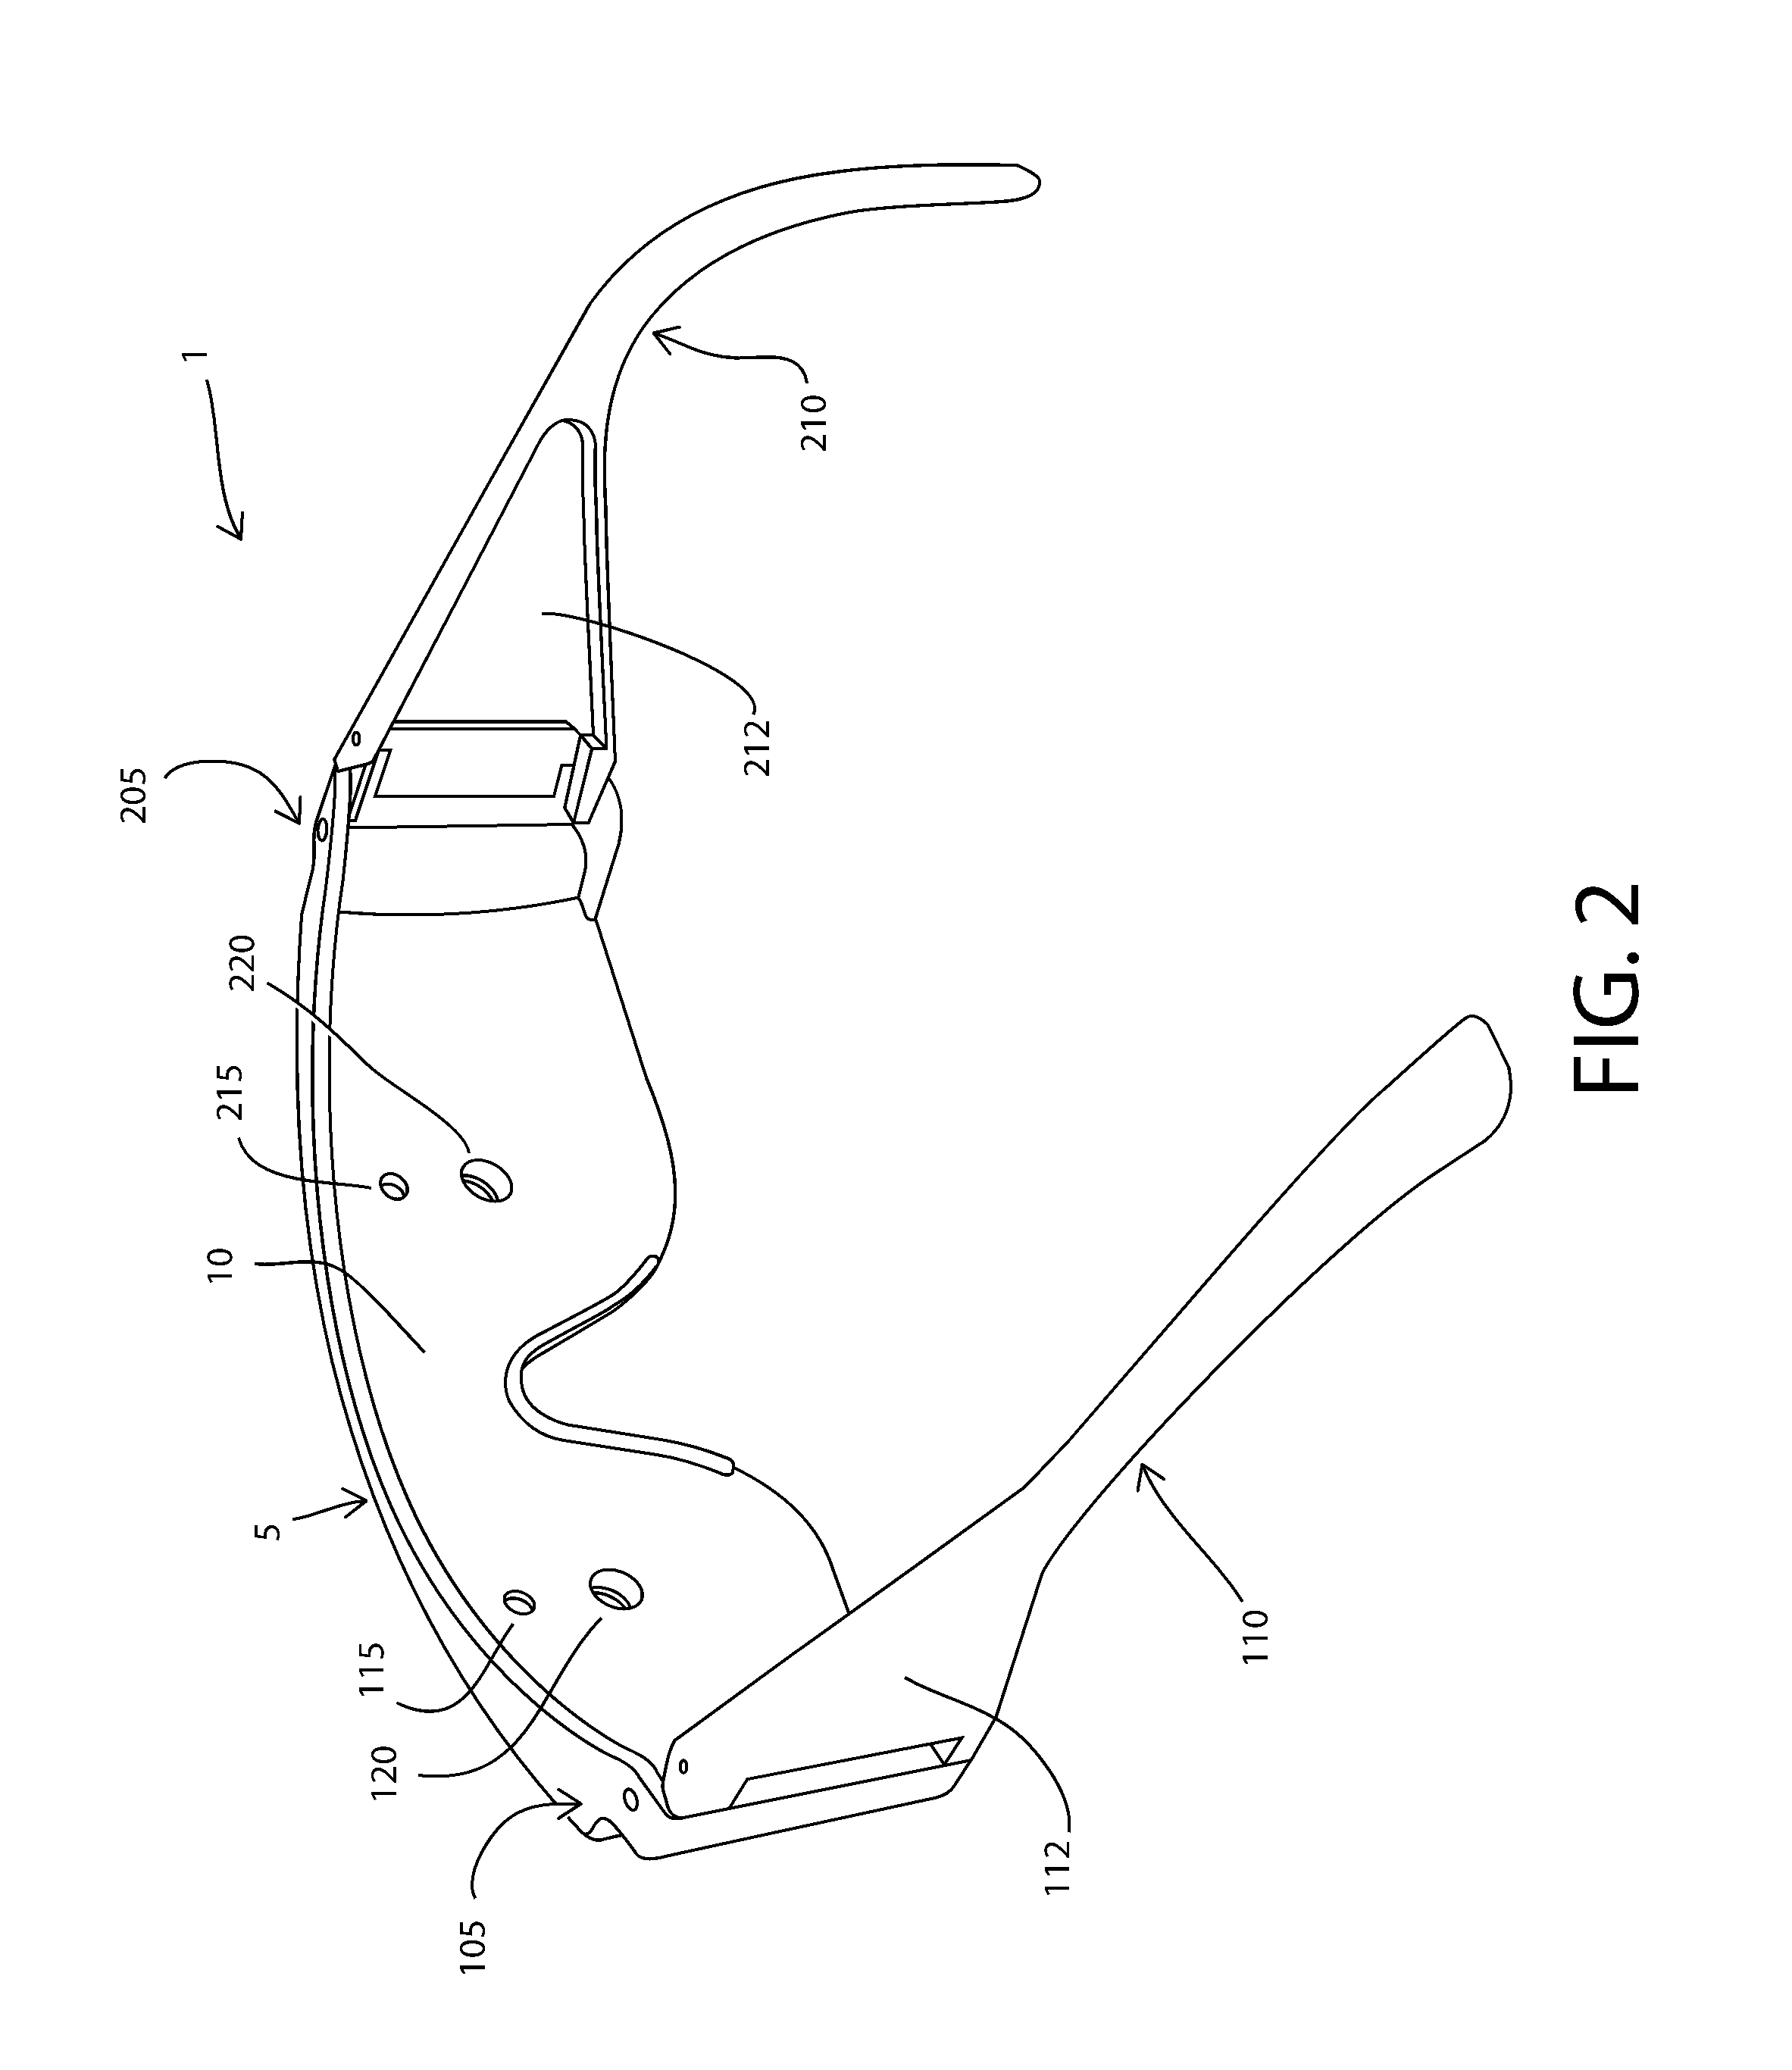 Devices and methods to facilitate eye positioning and eye drop installation